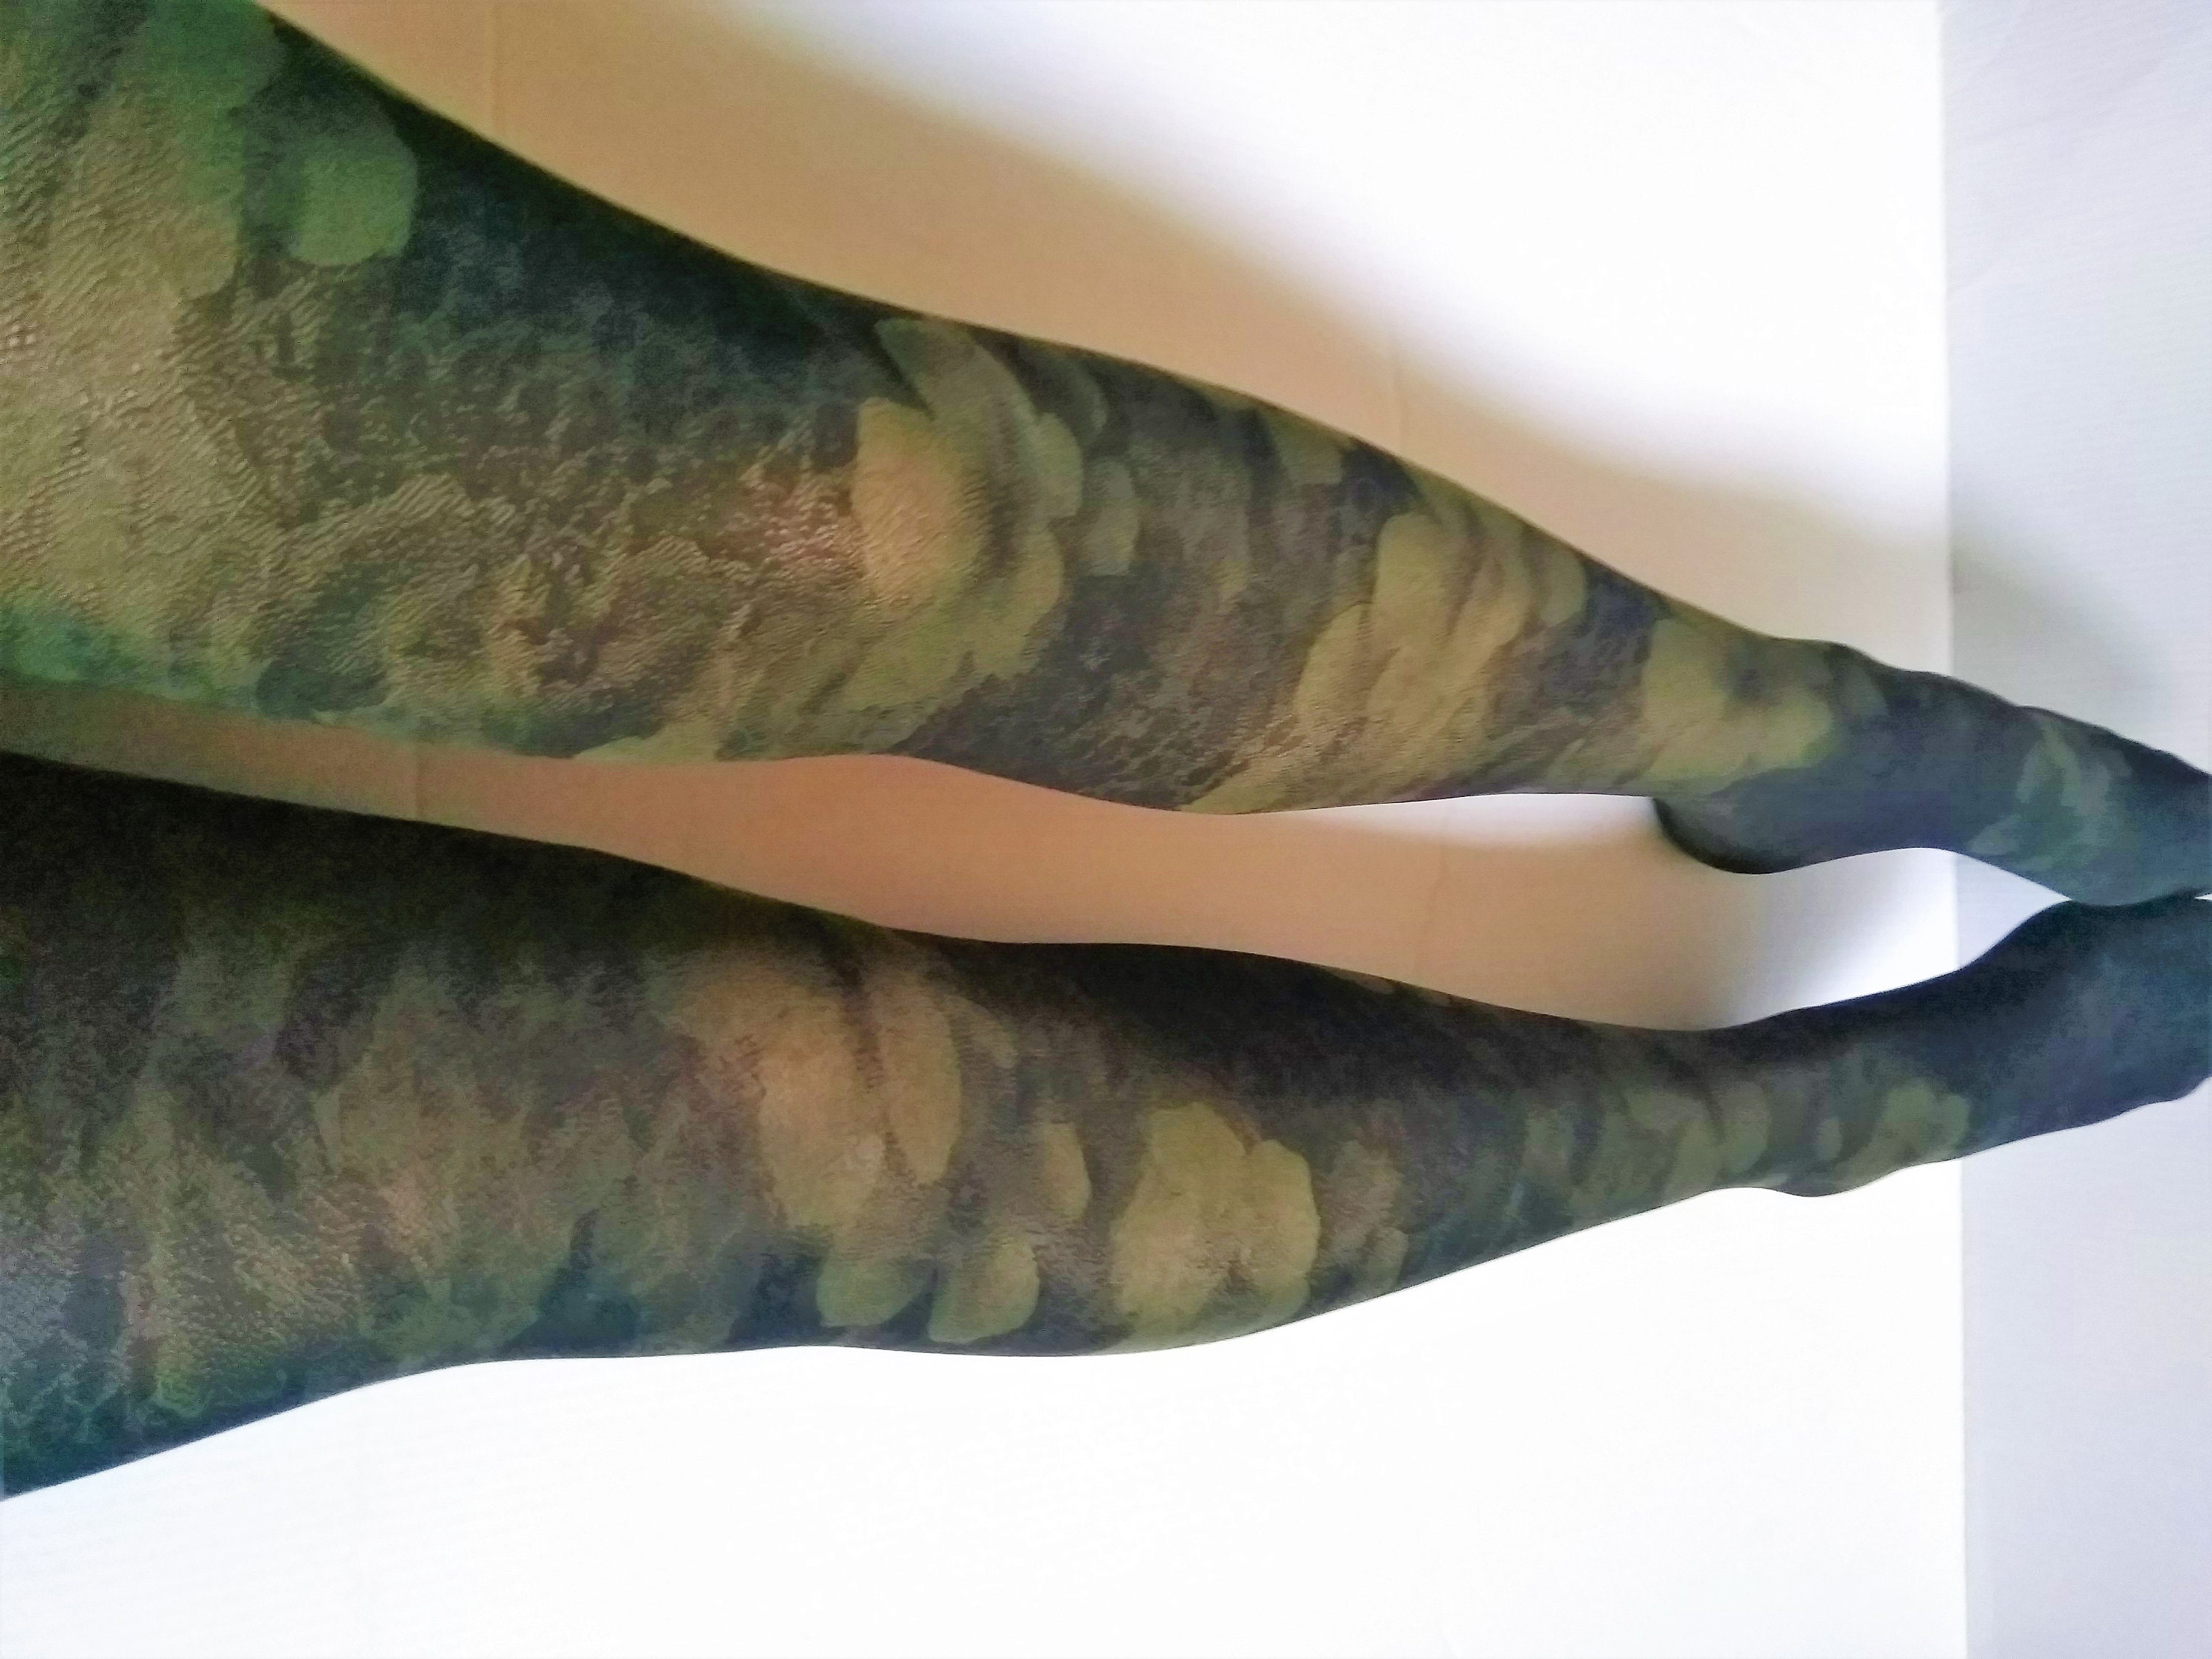 Olive Green Tights for Women. Opaque Printed Floral Lolita Fashion Spandex  Tights Hosiery Pantyhose.. Goodmother Gift. 